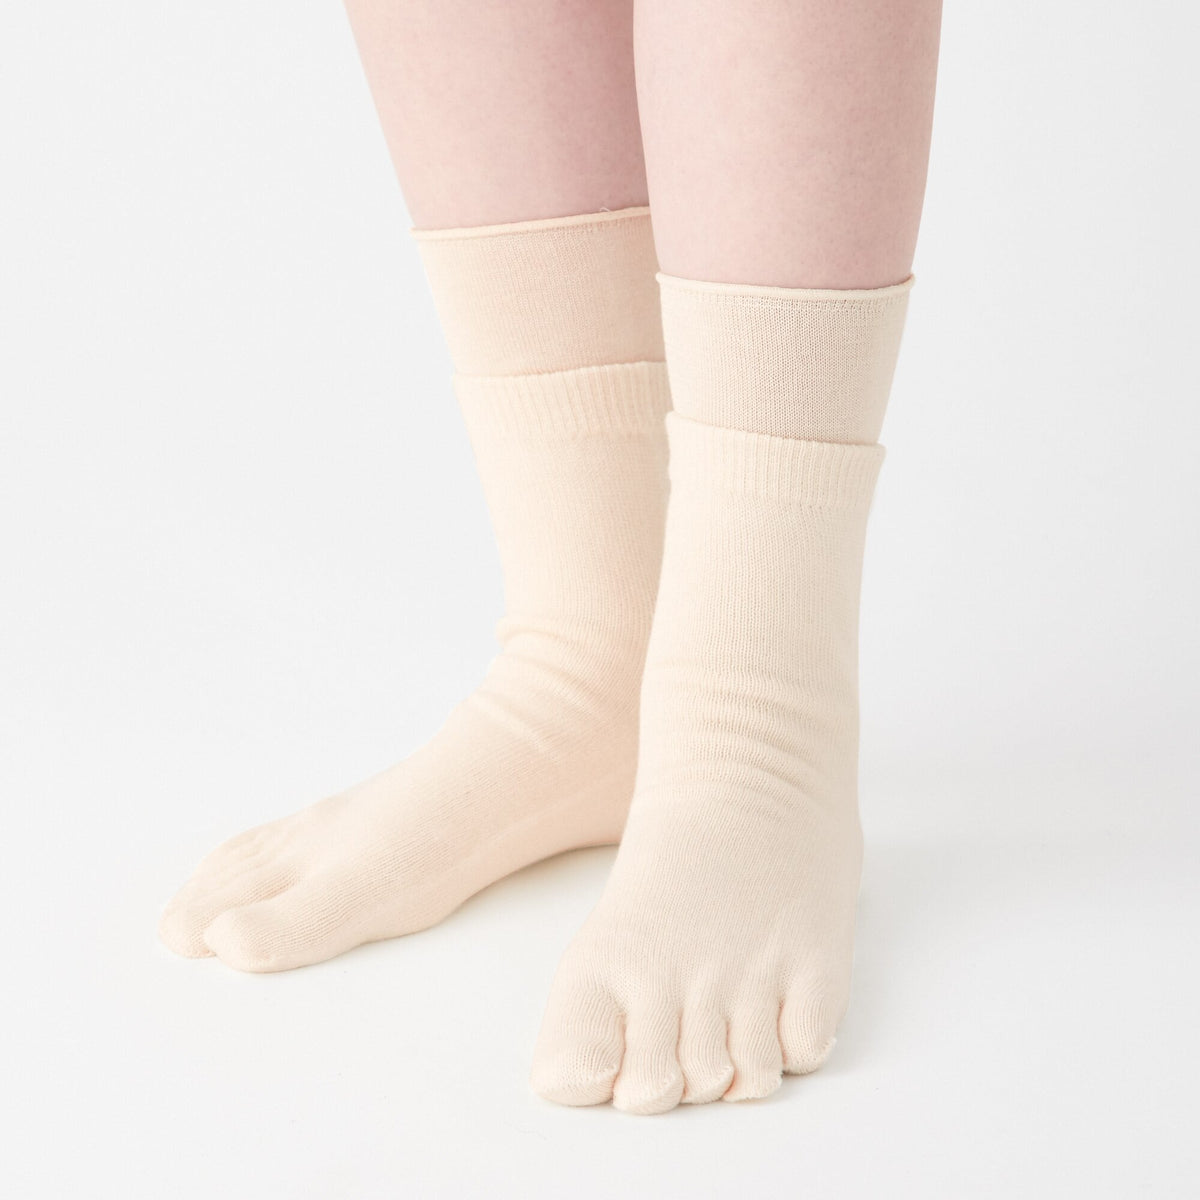 Right Angle 5-Toe Socks for Layering One Size (2 Pairs)